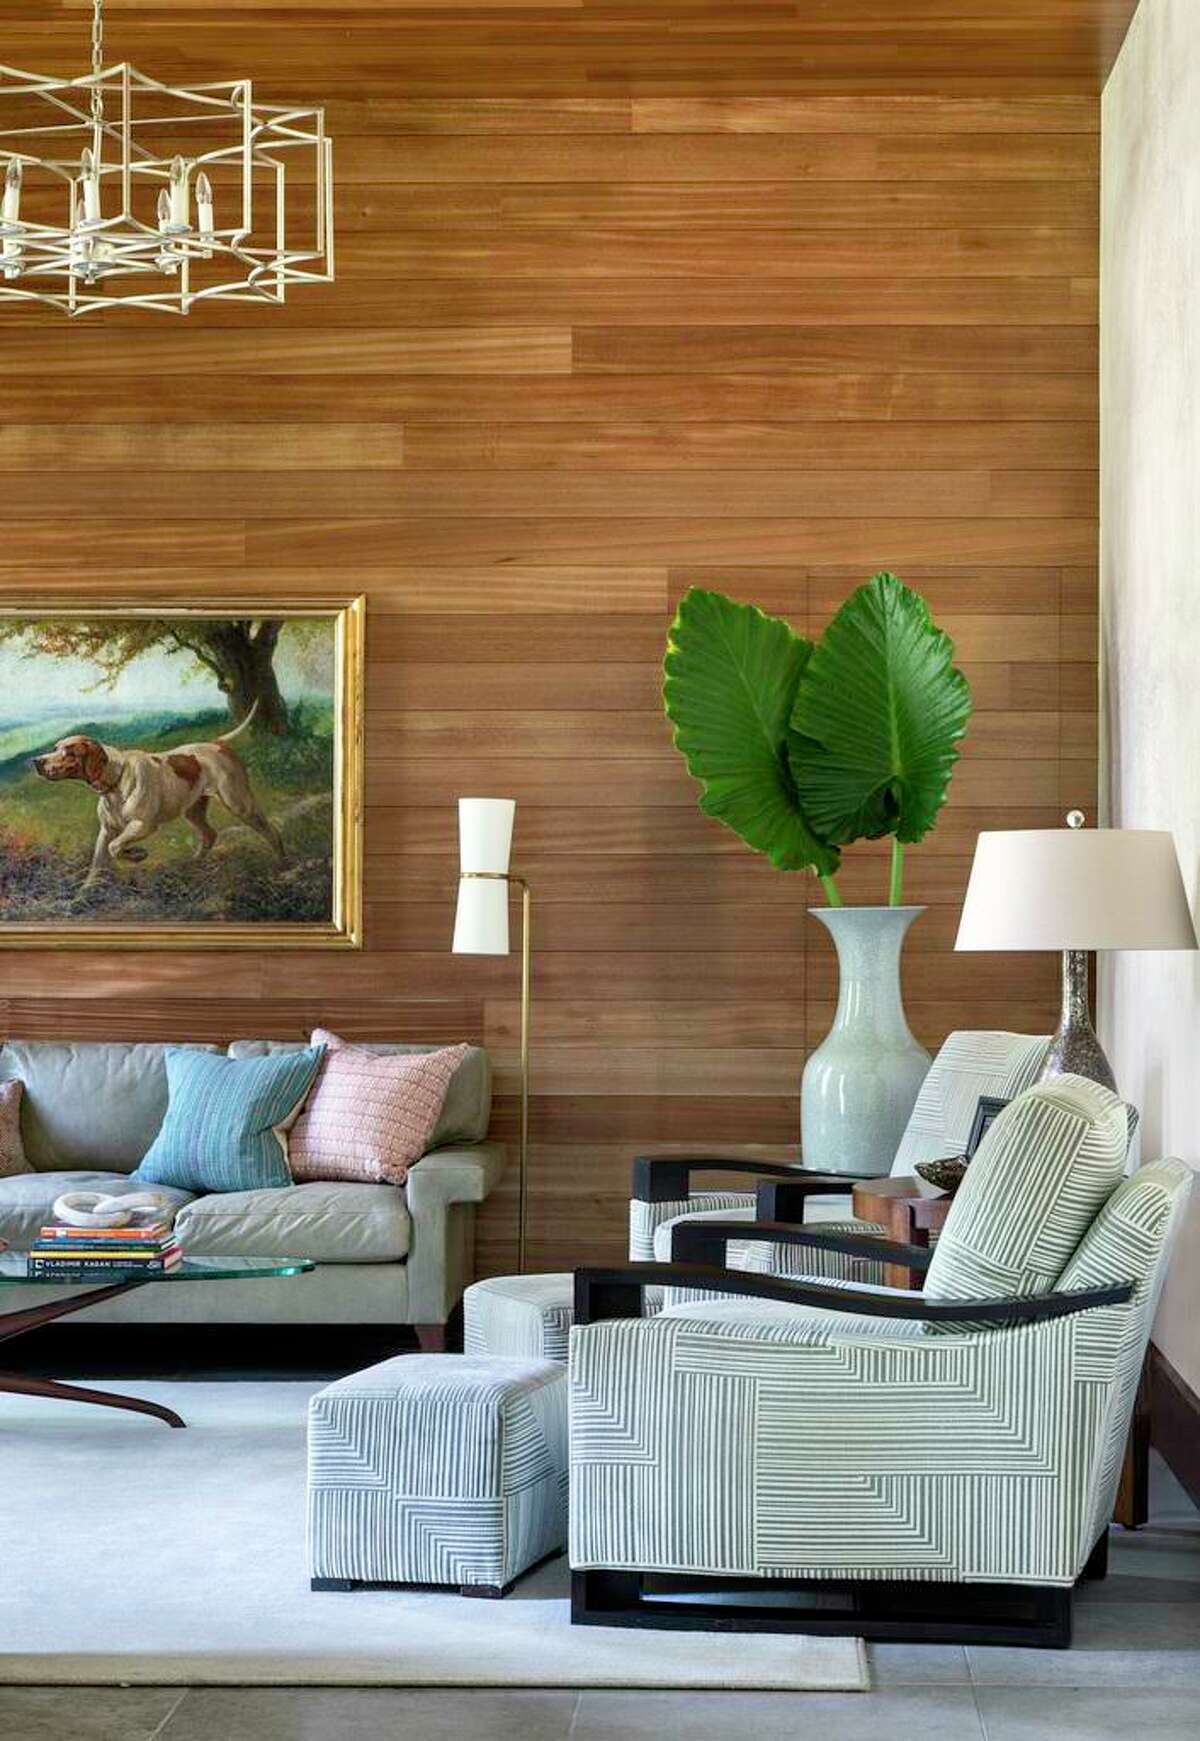 Bleached mahogany paneling covers two walls and the ceiling in the study or TV room.